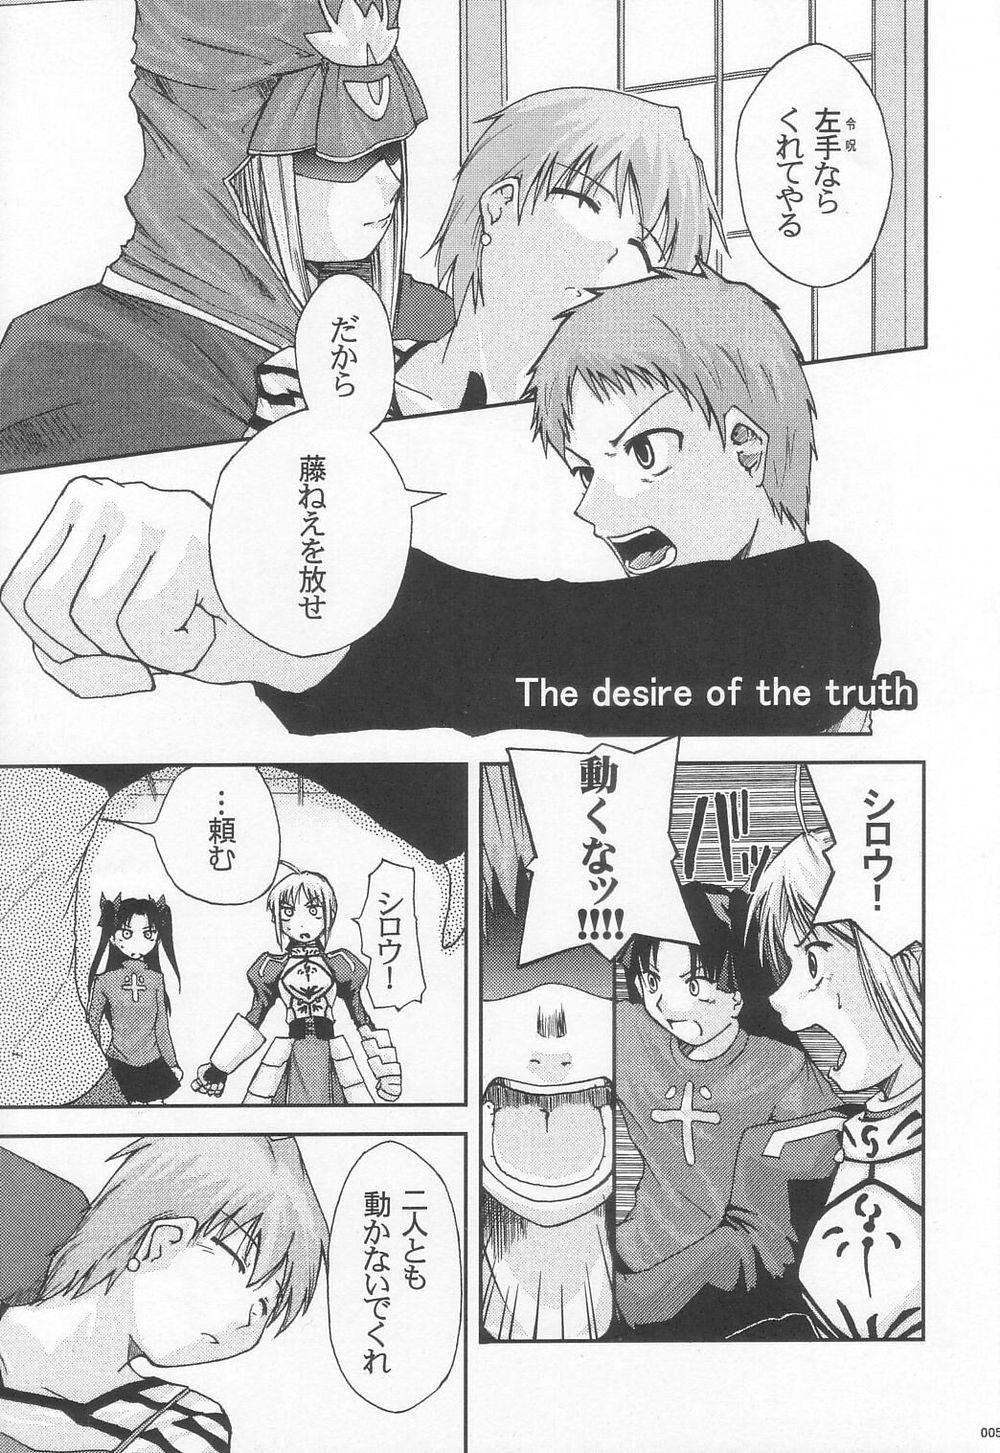 Milf Fuck The desire of the truth - Fate stay night Negra - Page 4